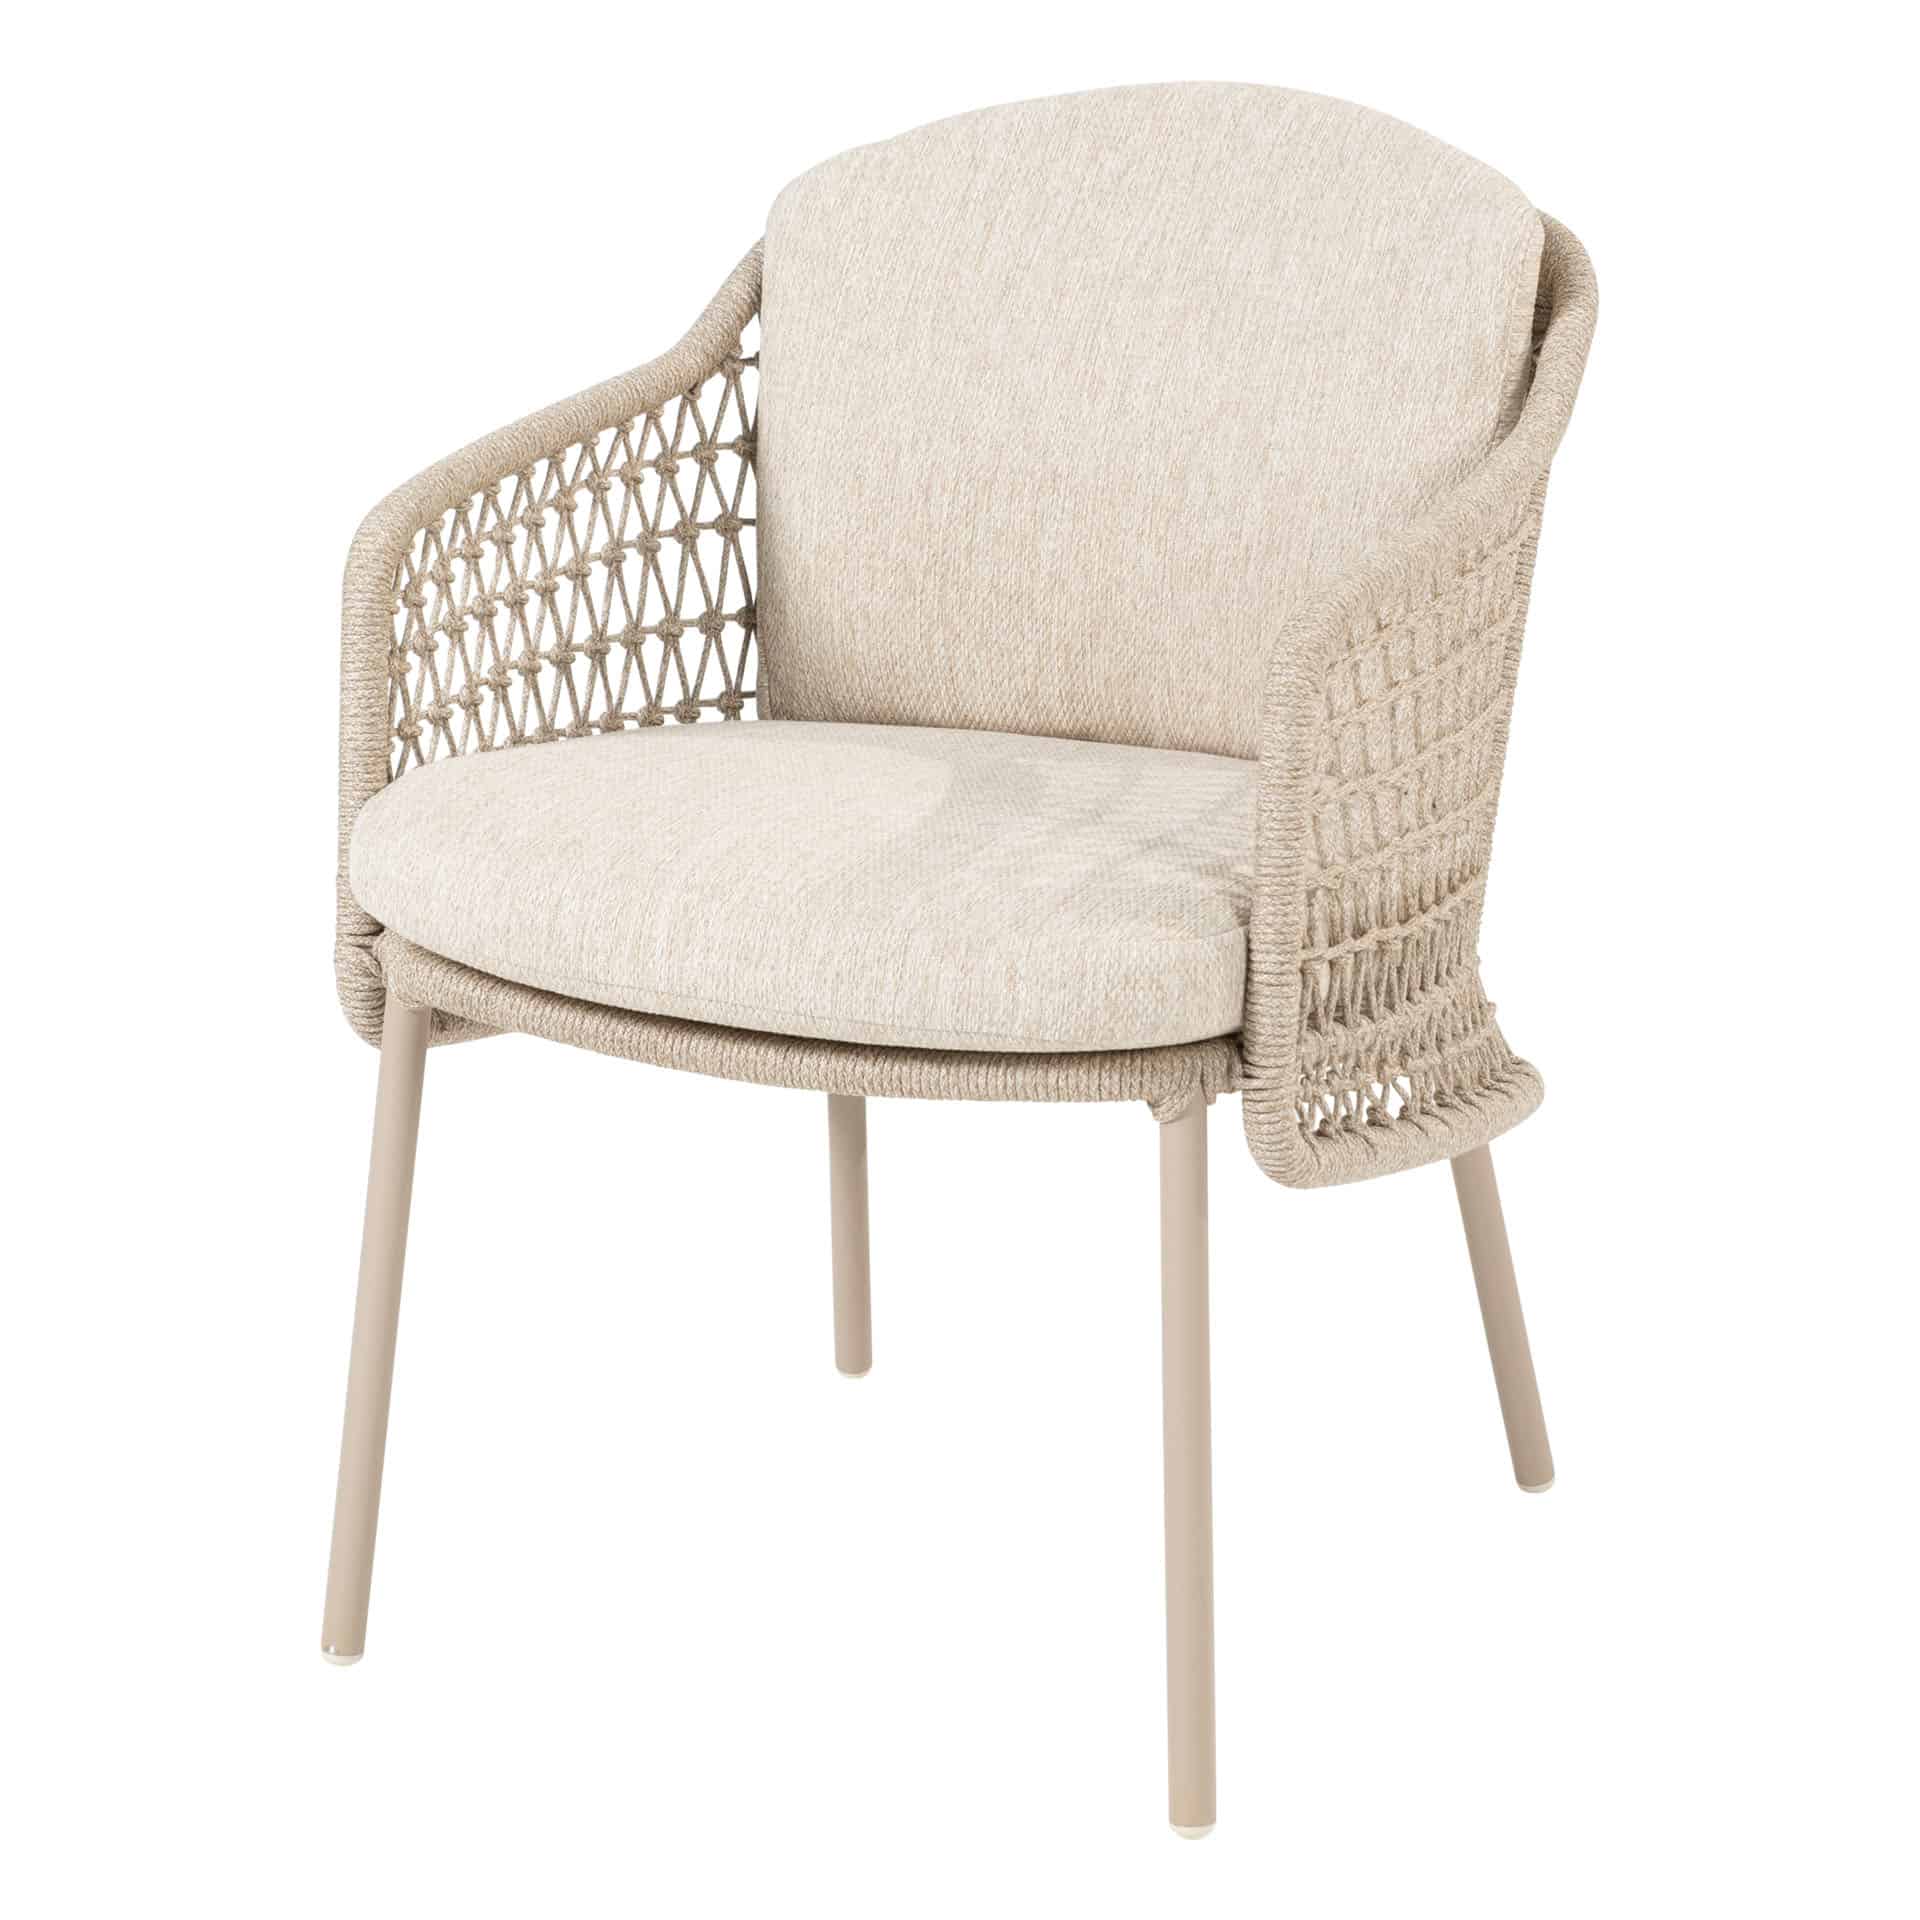 213935_-Puccini-dining-chair-latte-with-2-cushions-01